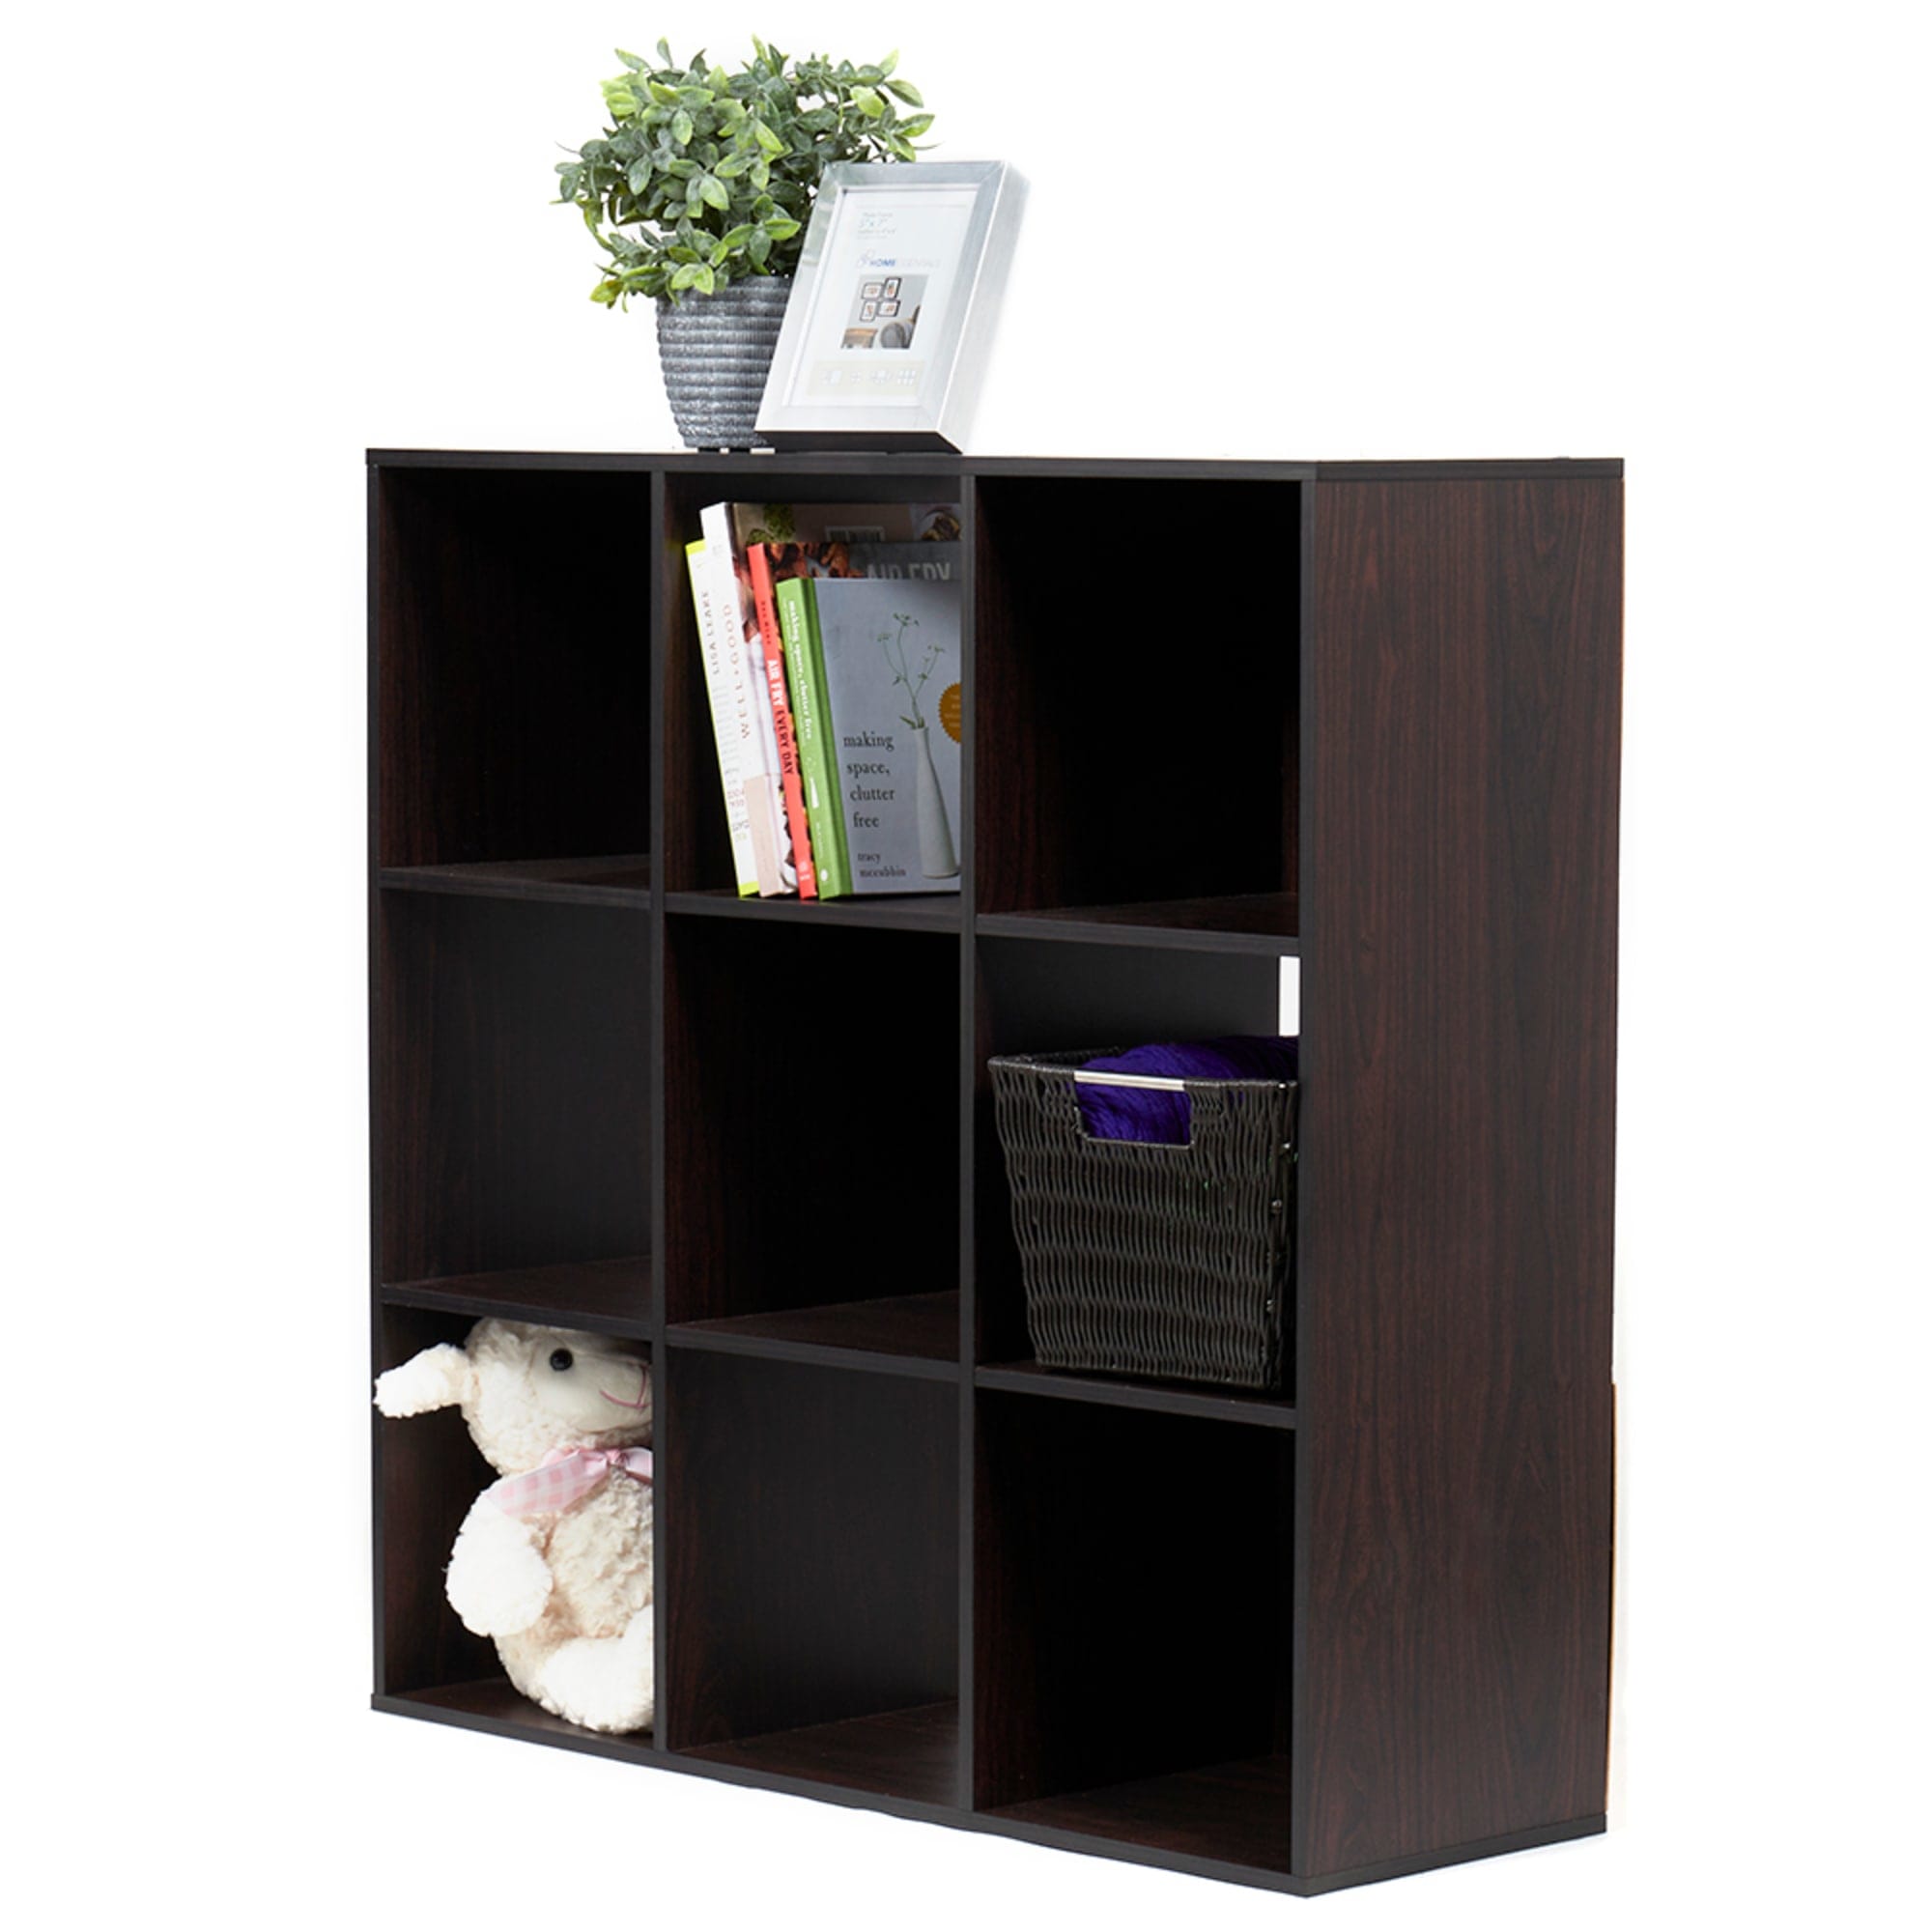 Home Basics Open and Enclosed 9 Cube MDF Storage Organizer, Espresso $50.00 EACH, CASE PACK OF 1